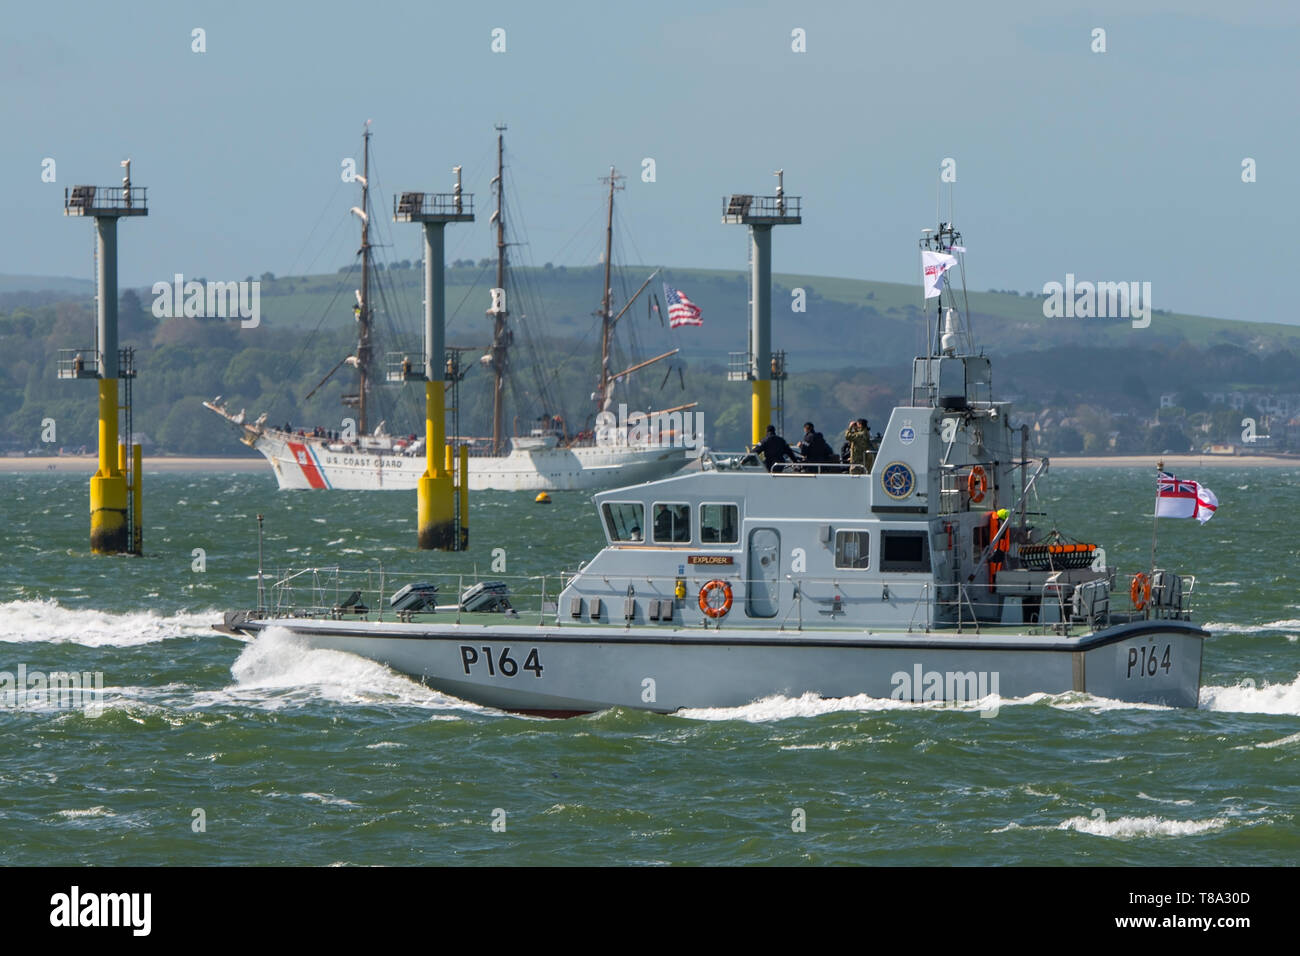 The Royal Navy Archer Class patrol boat HMS Explorer (P164) in The Solent, UK for sea training on 25/4/19 with the USCGC Eagle in the background. Stock Photo